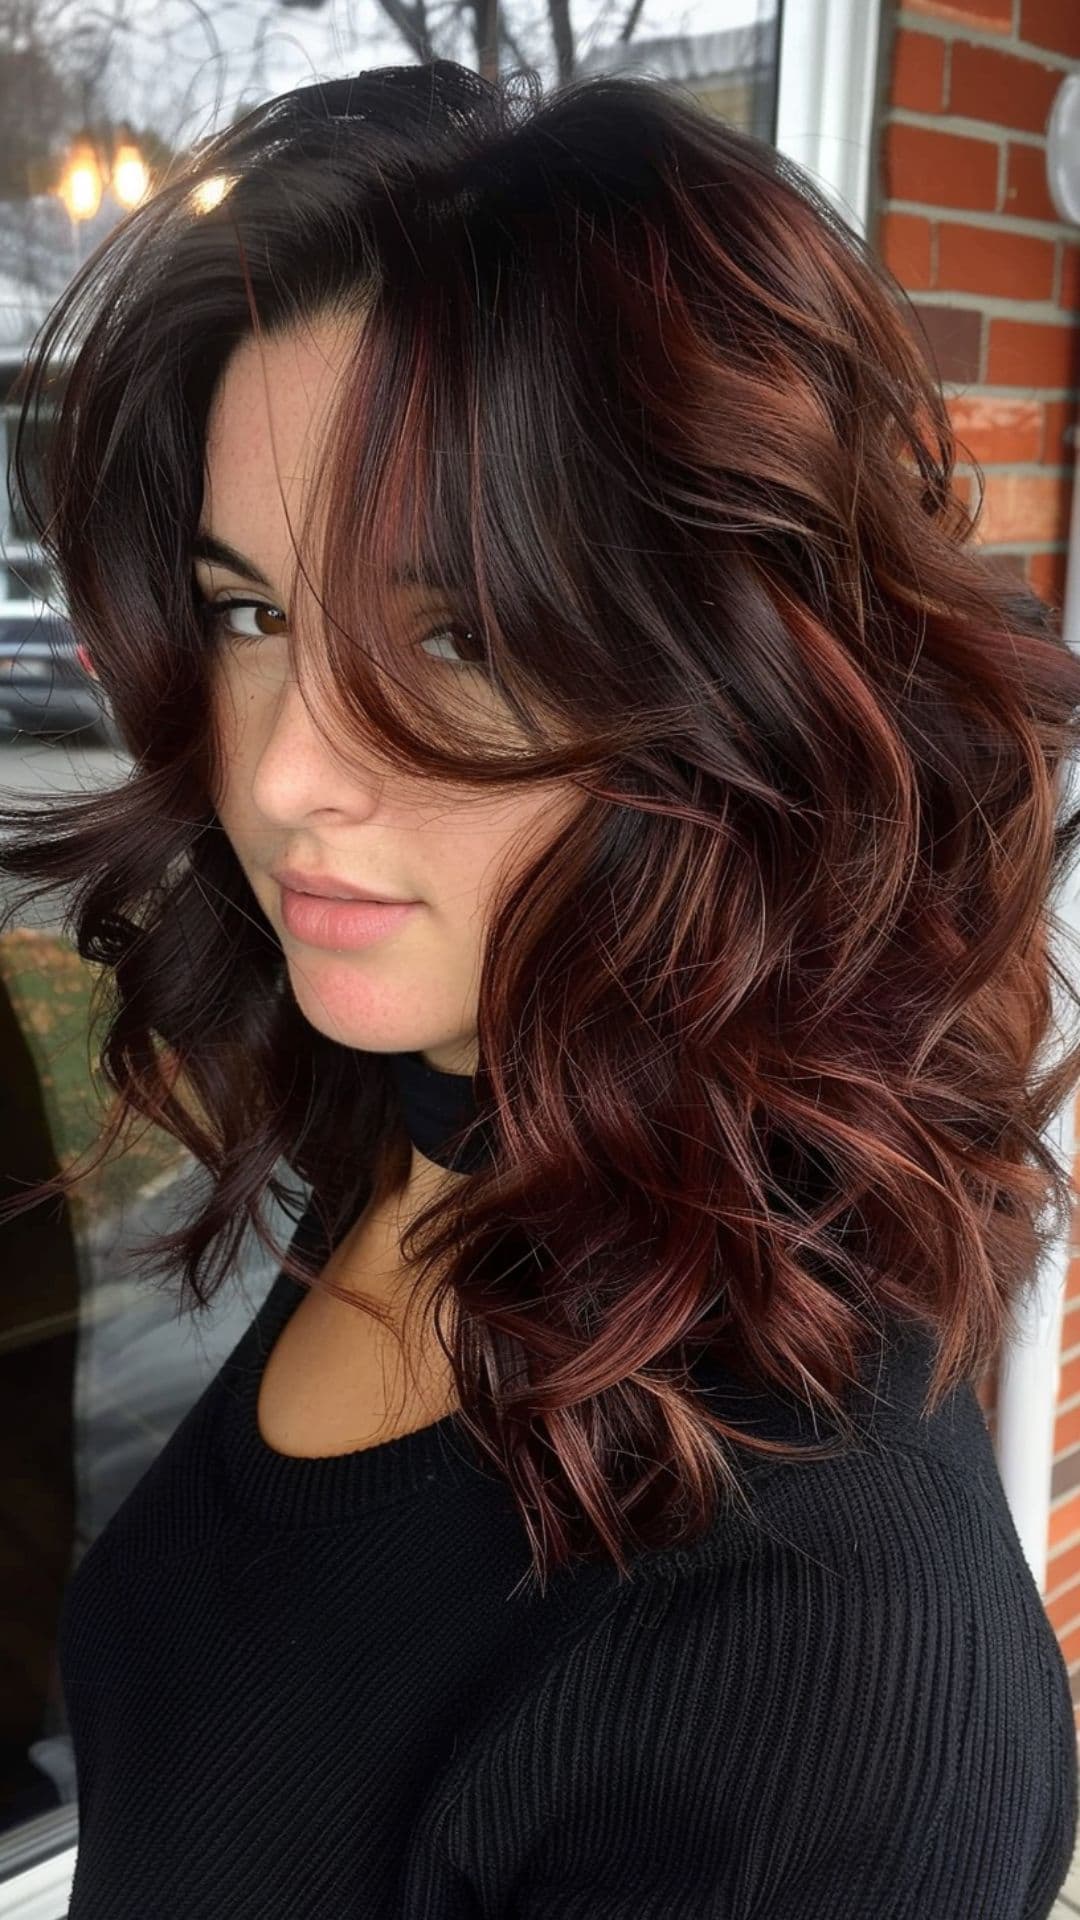 A woman modelling a espresso hair with red wine highlights.